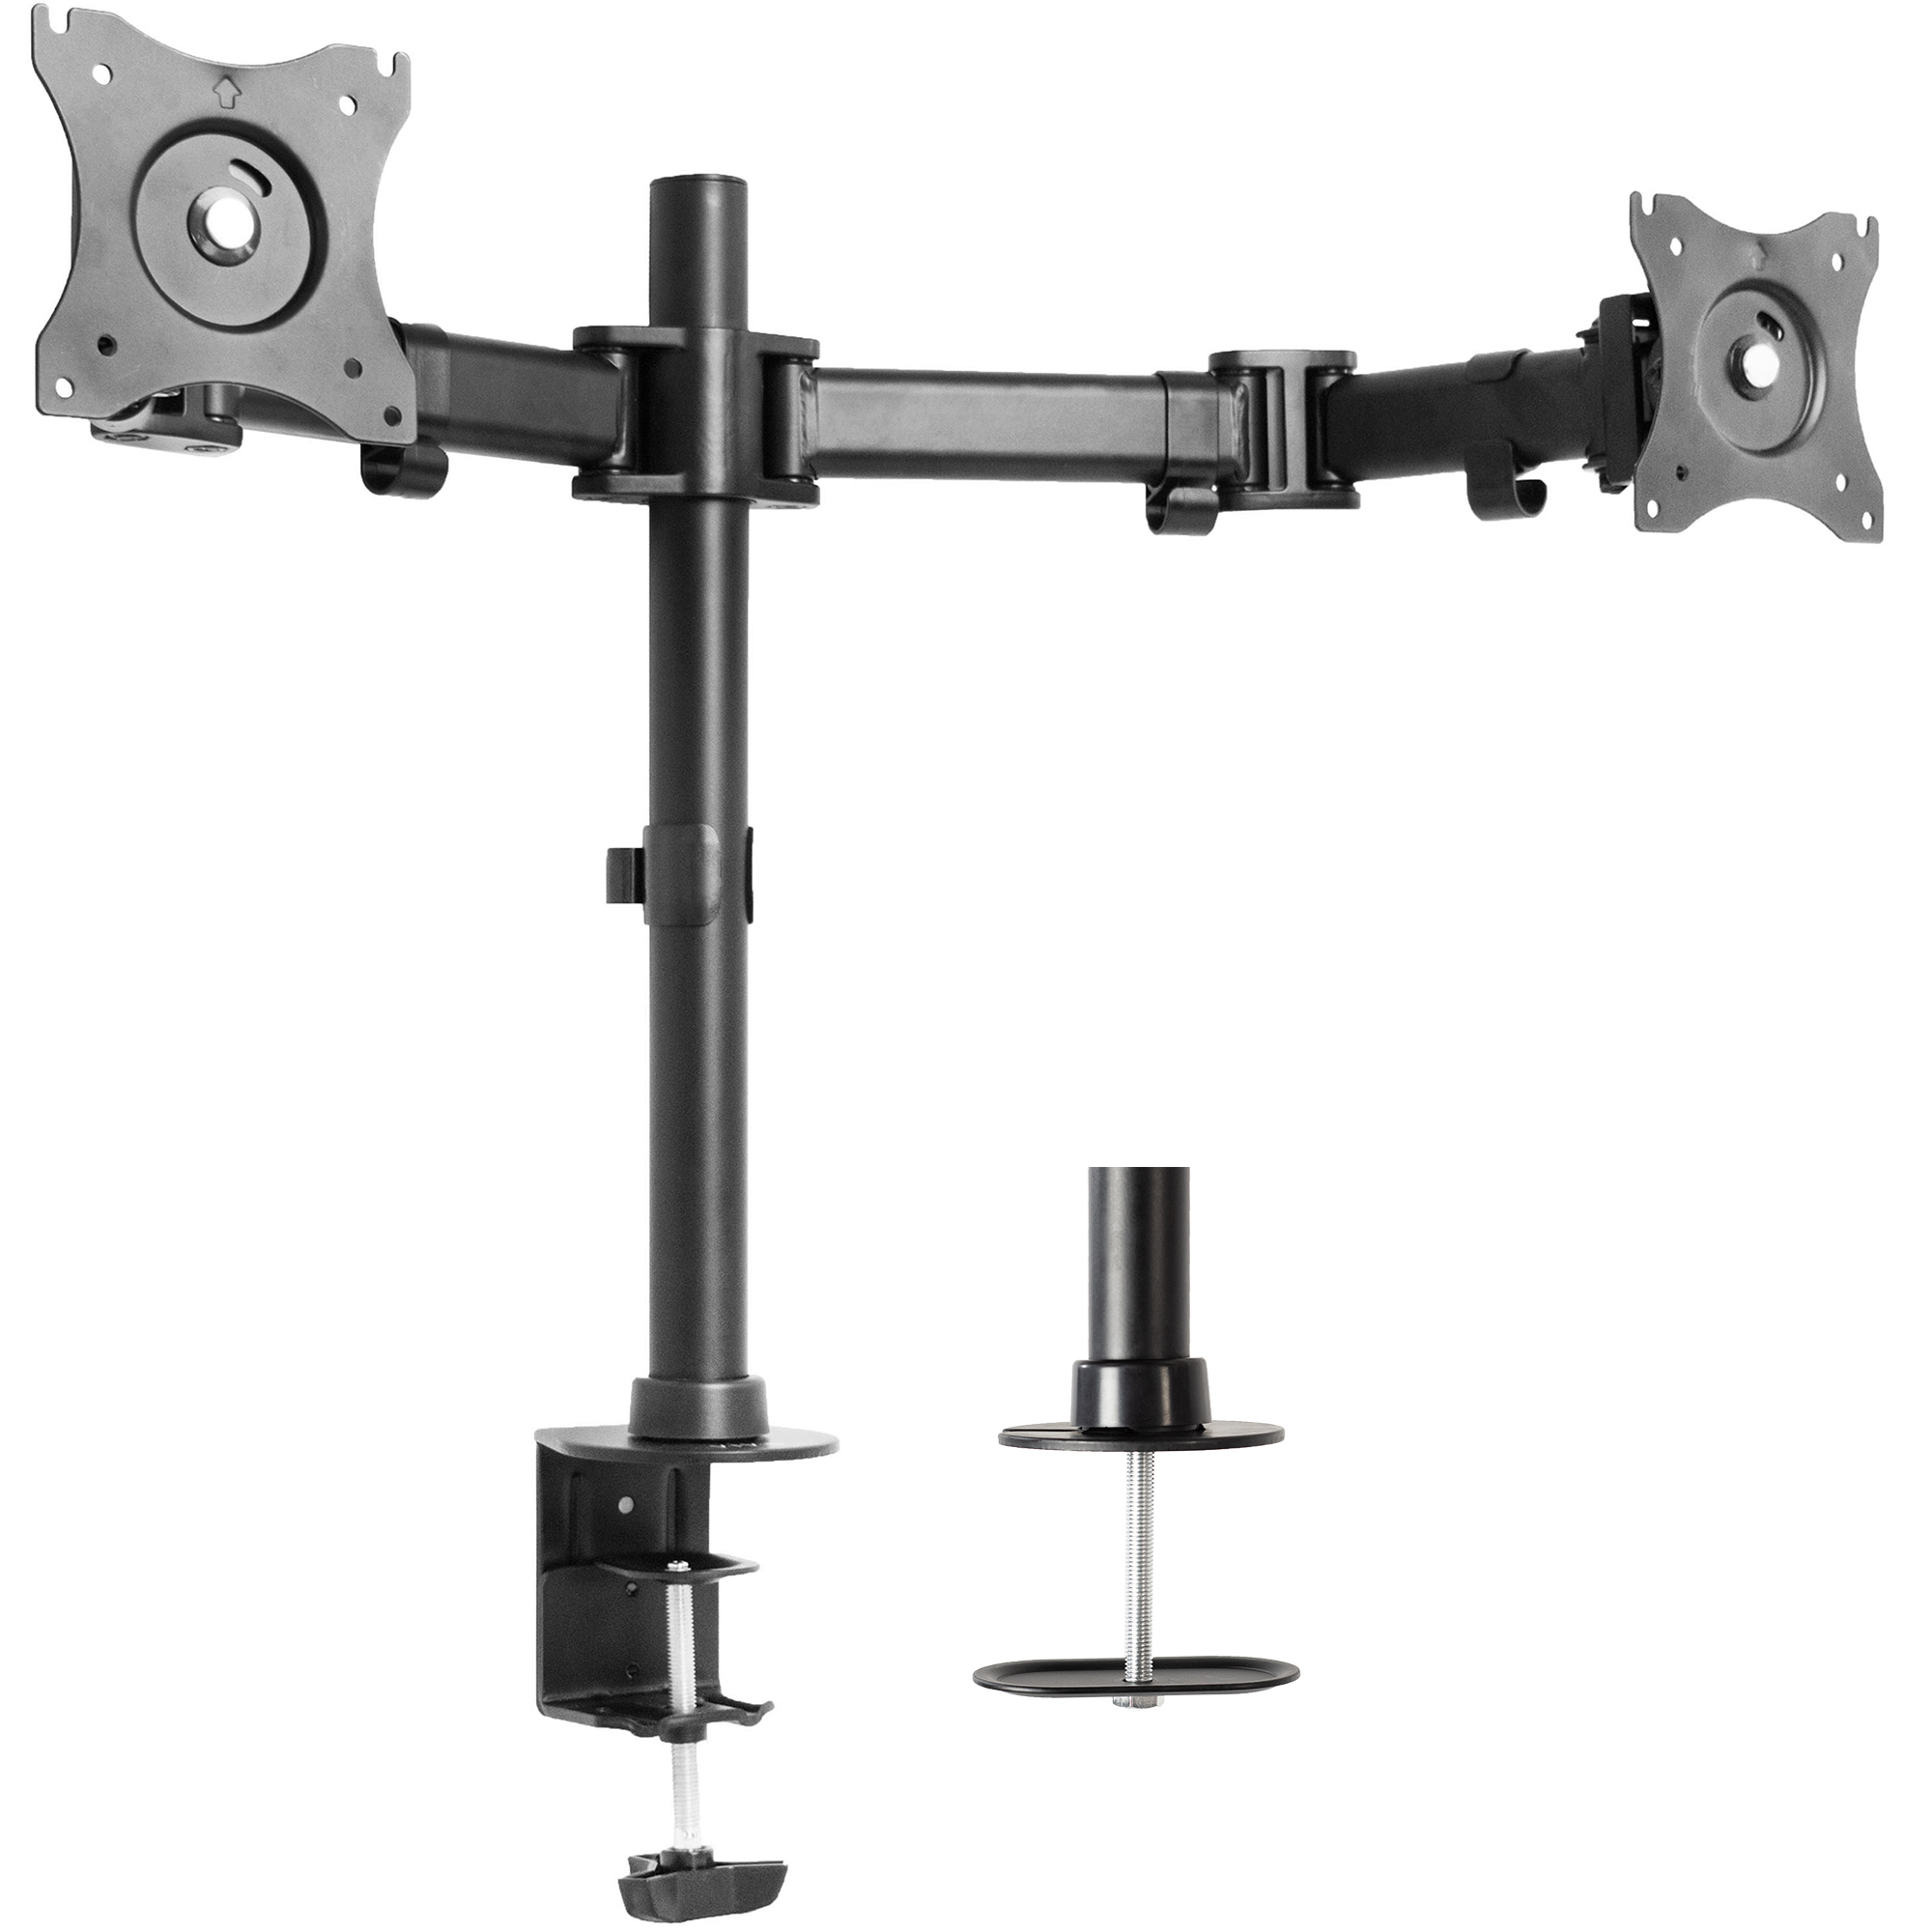 Vivo Dual Monitor Arms Fully Adjustable Desk Mount Stand Fits 2